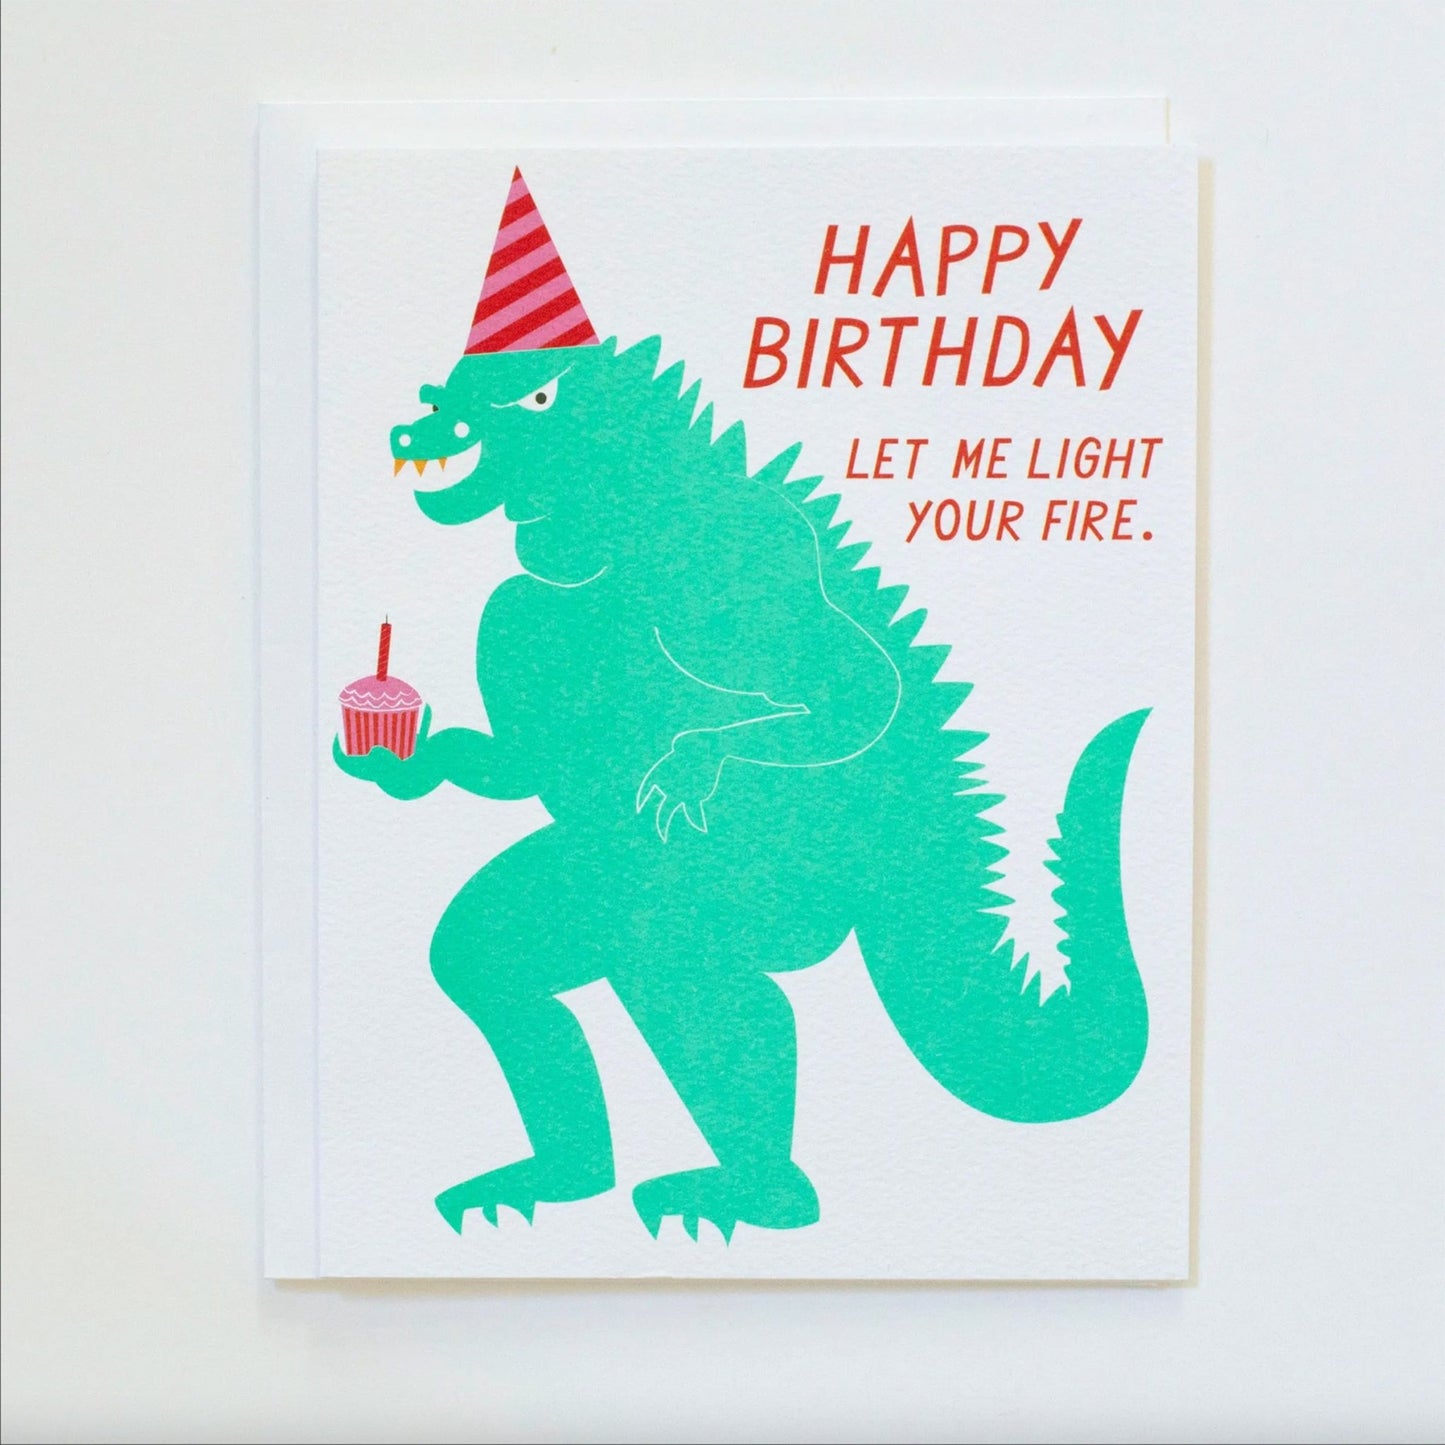 Happy Birthday - Let Me Light Your Fire - Note Card | BANQUET WORKSHOP - Muse + Moonstone